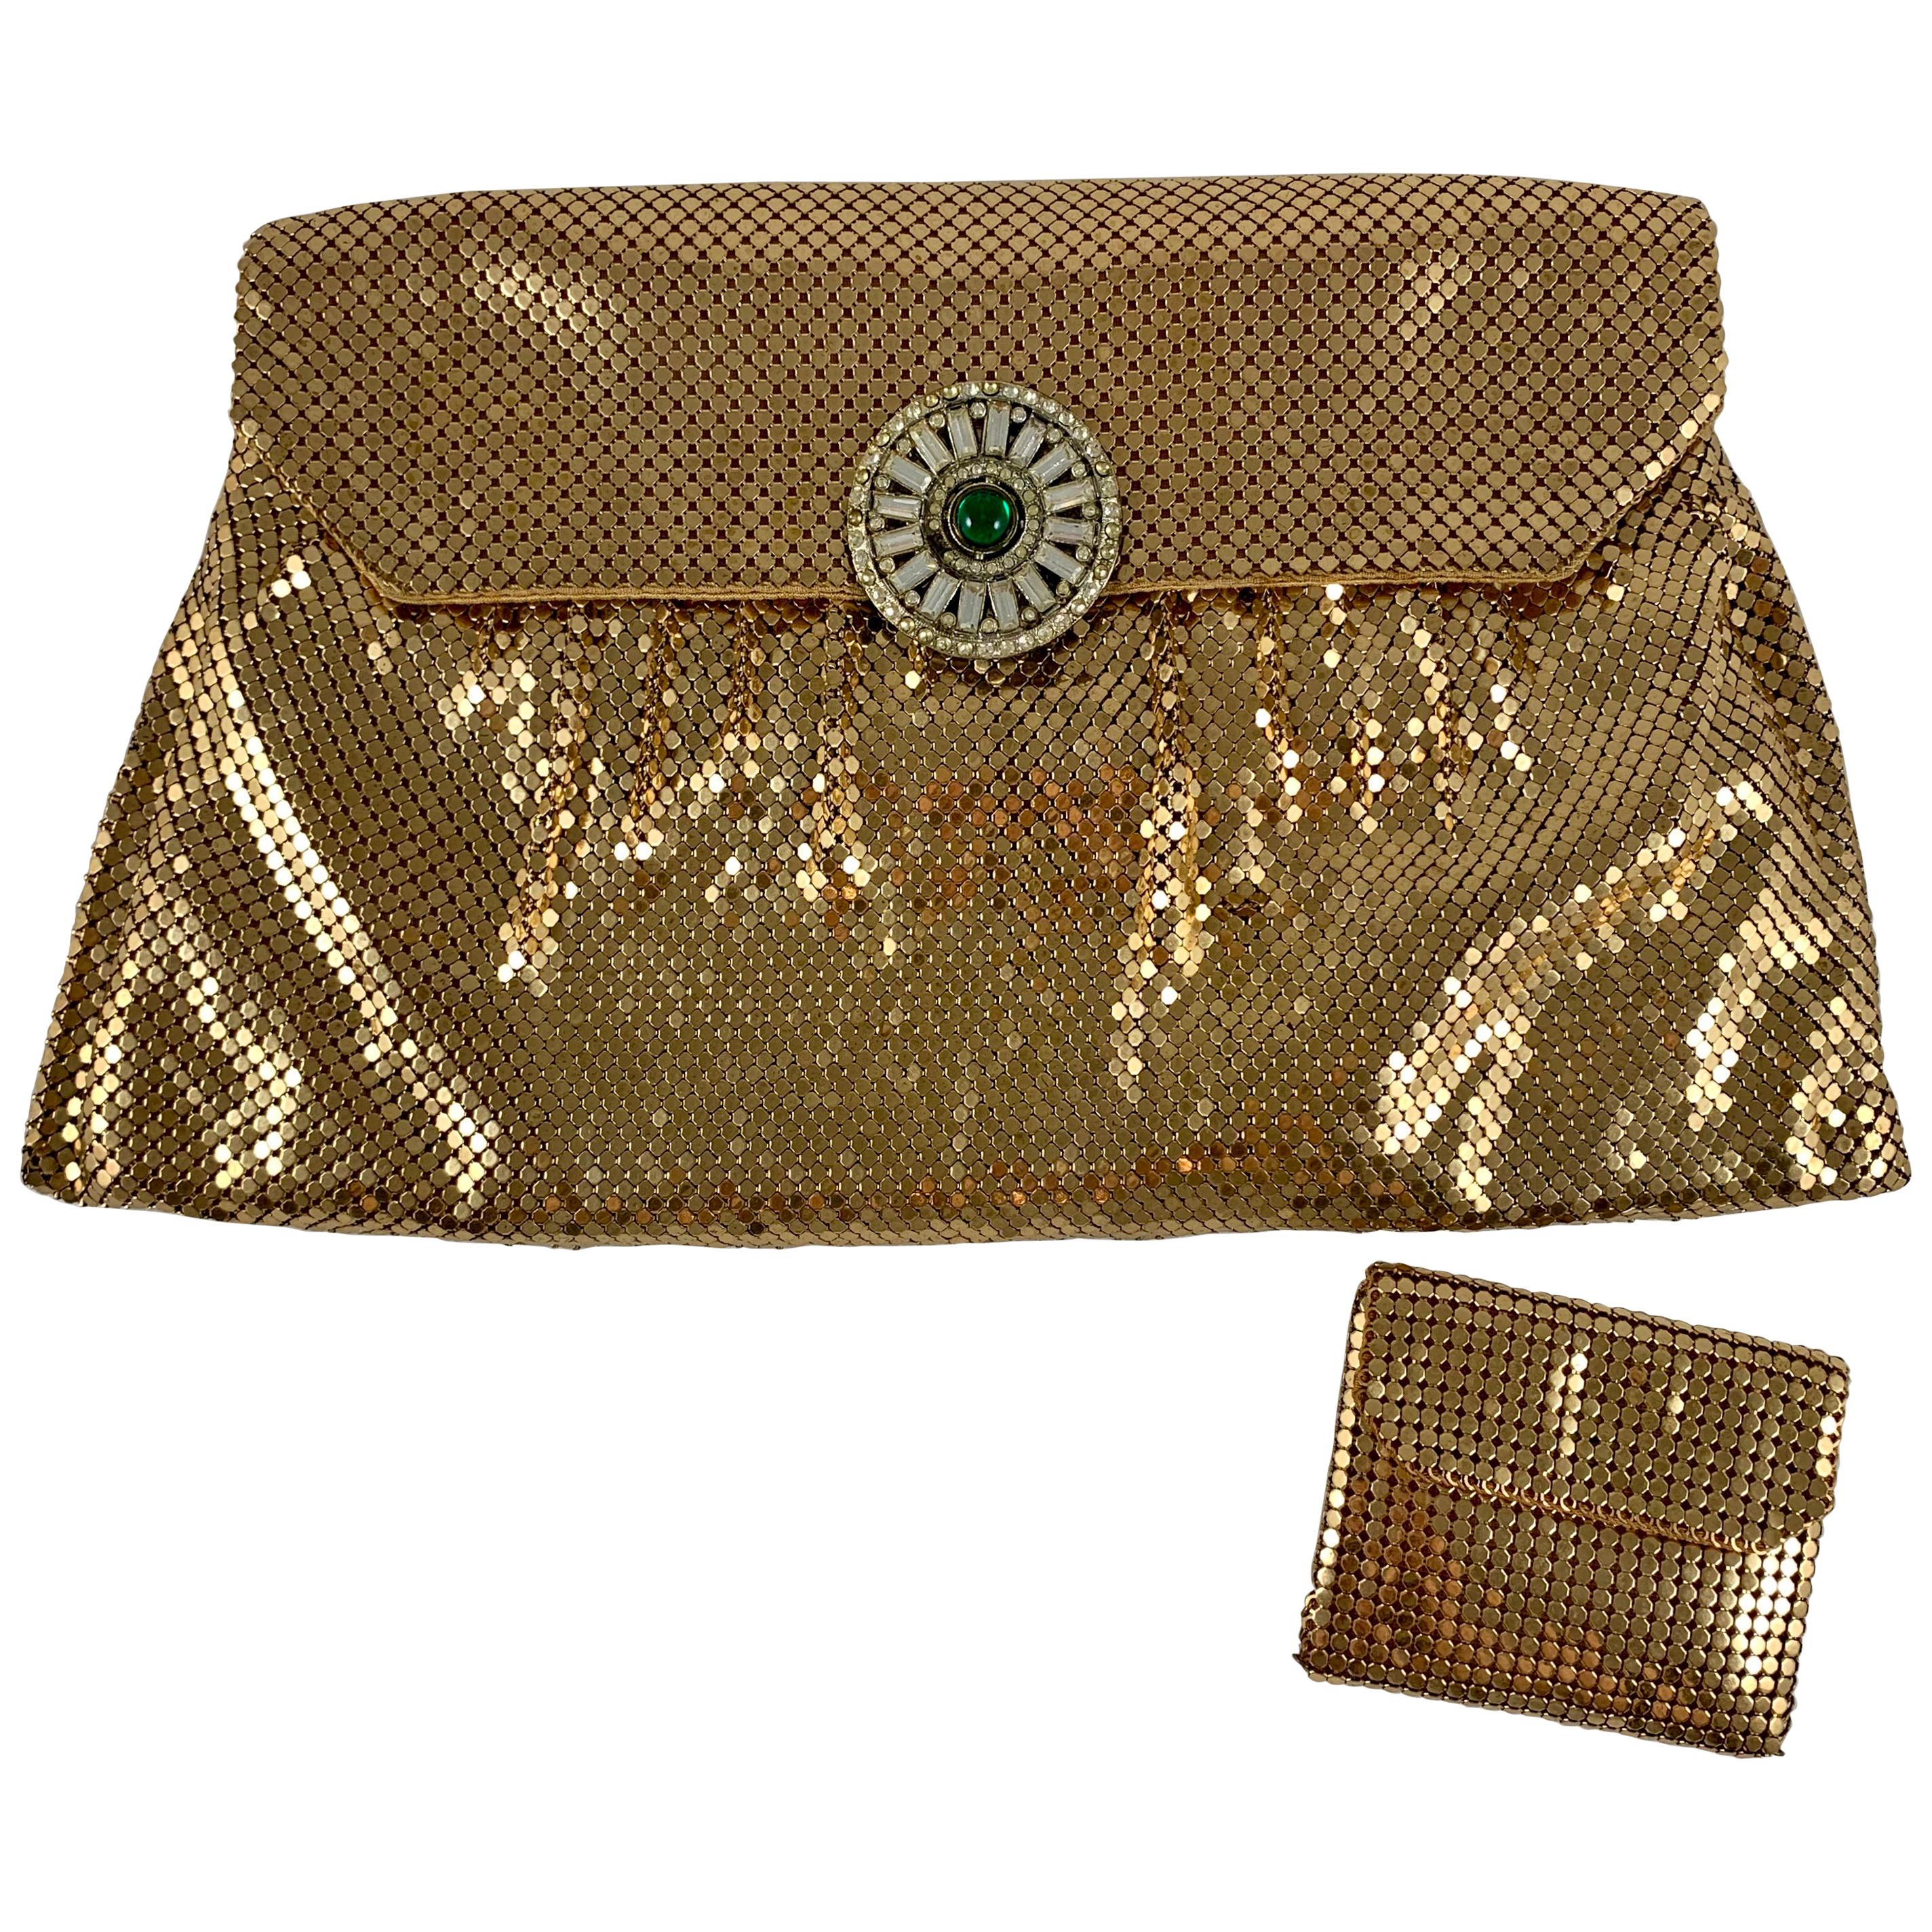 1950s Whiting and Davis Gold Mesh Jewel Closure Evening Clutch avec Coin Purse